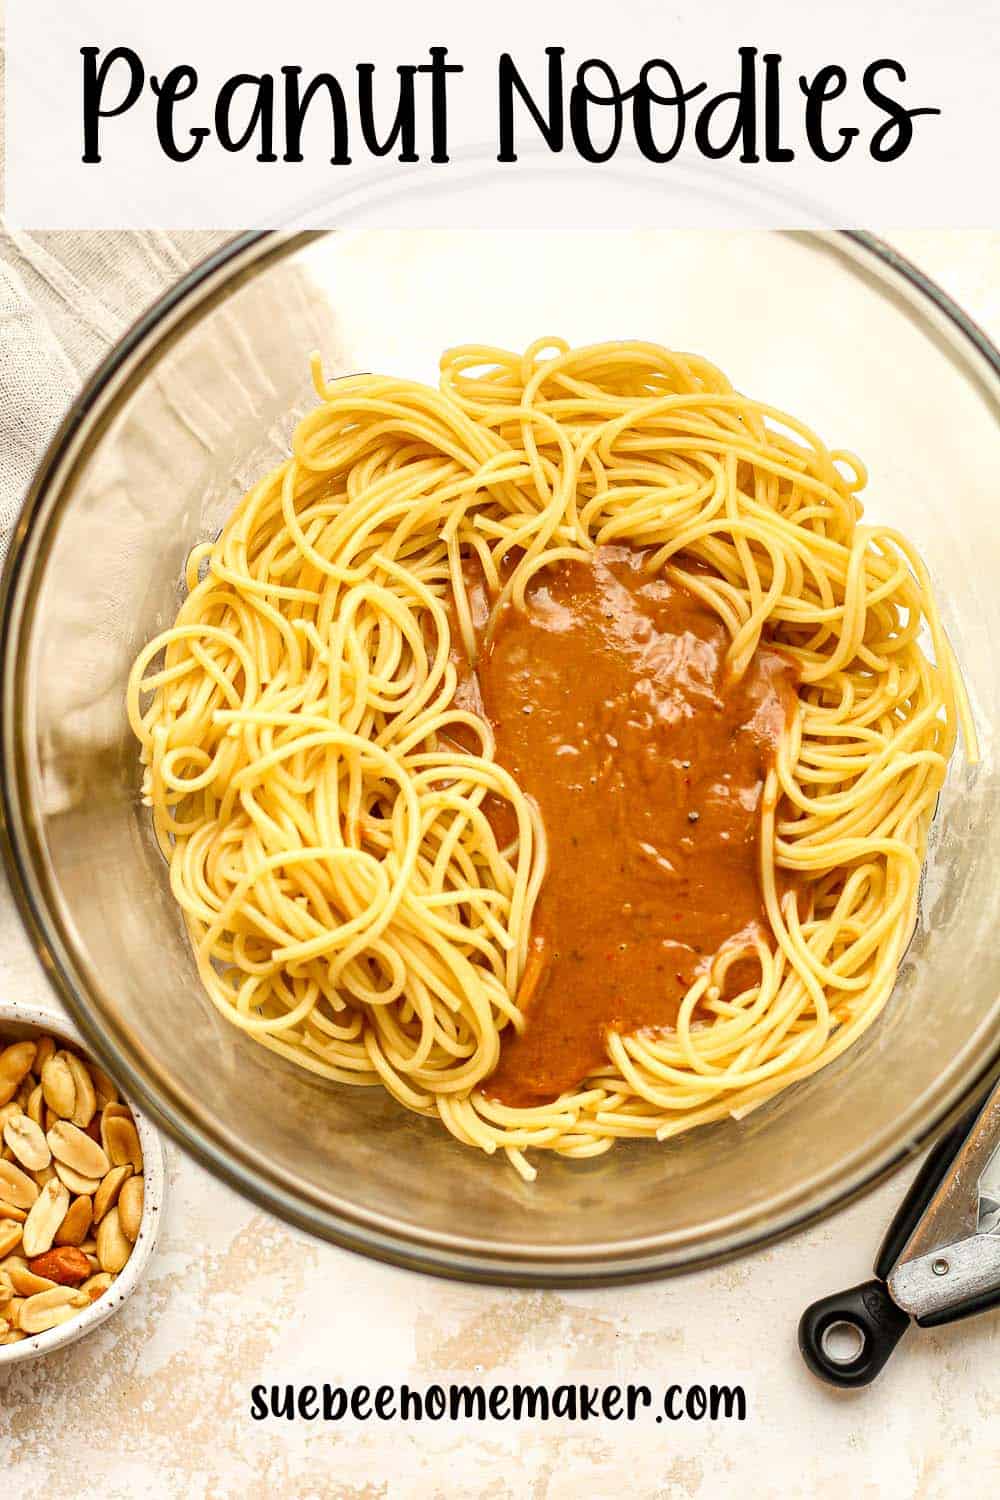 A bowl of spaghetti noodles with peanut sauce.